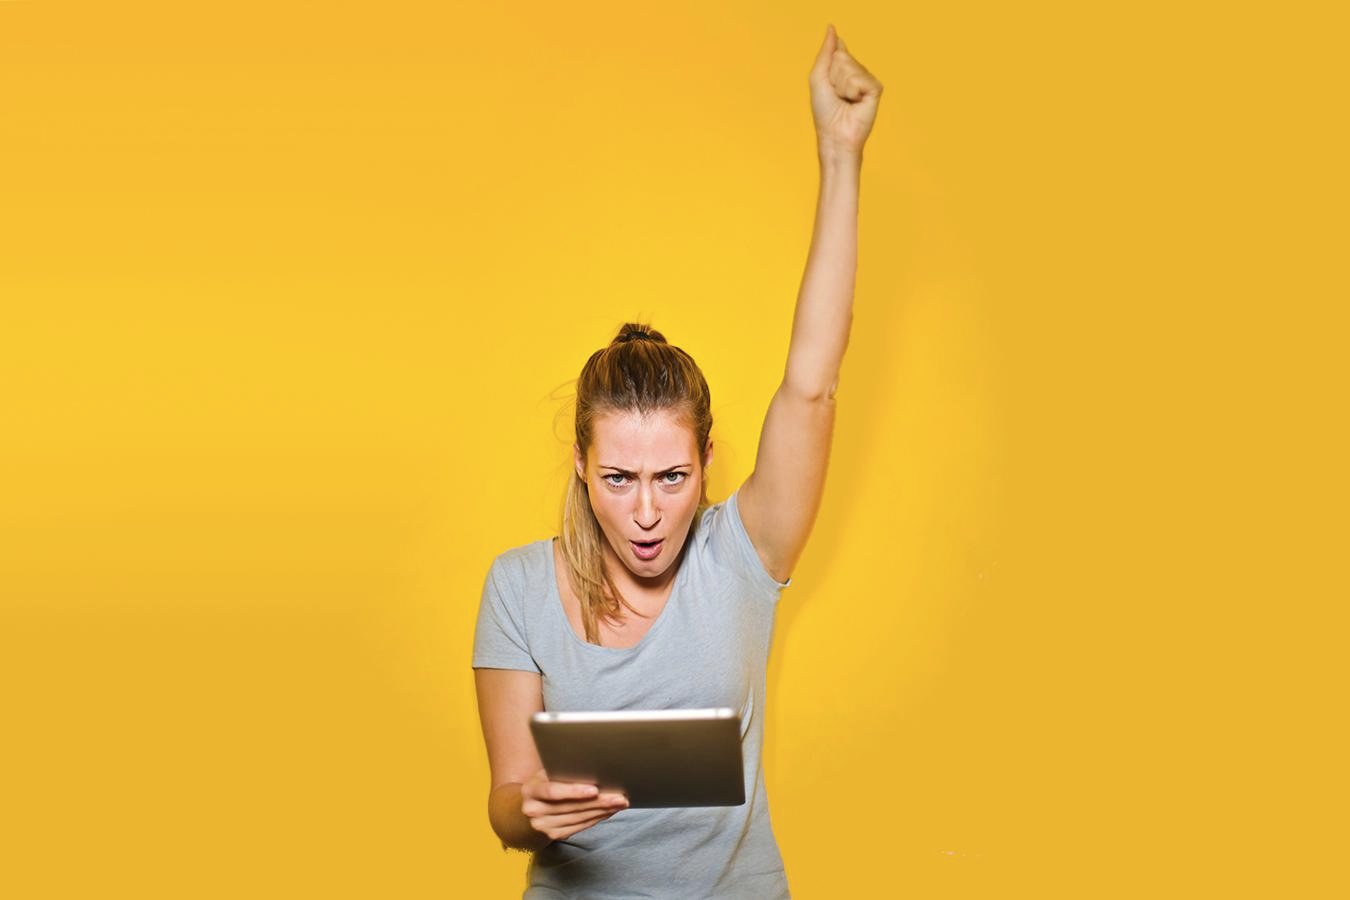 A young woman holding a tablet and punching the air, against a bright yellow background